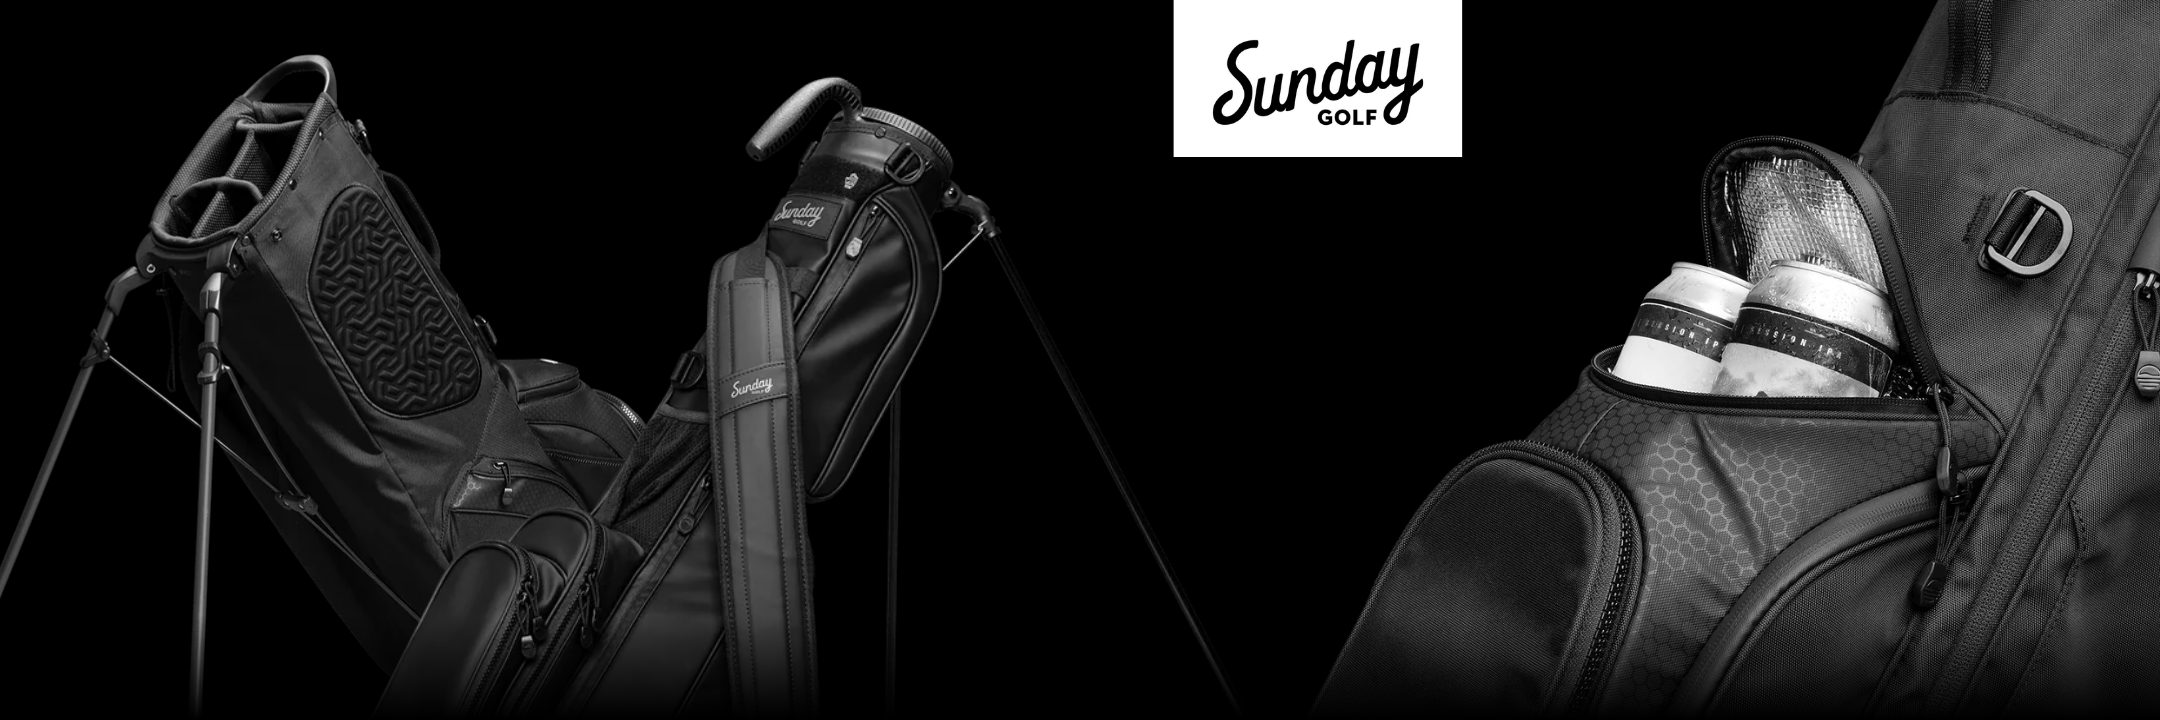 Sunday Golf Bags by Vertical Groove Golf